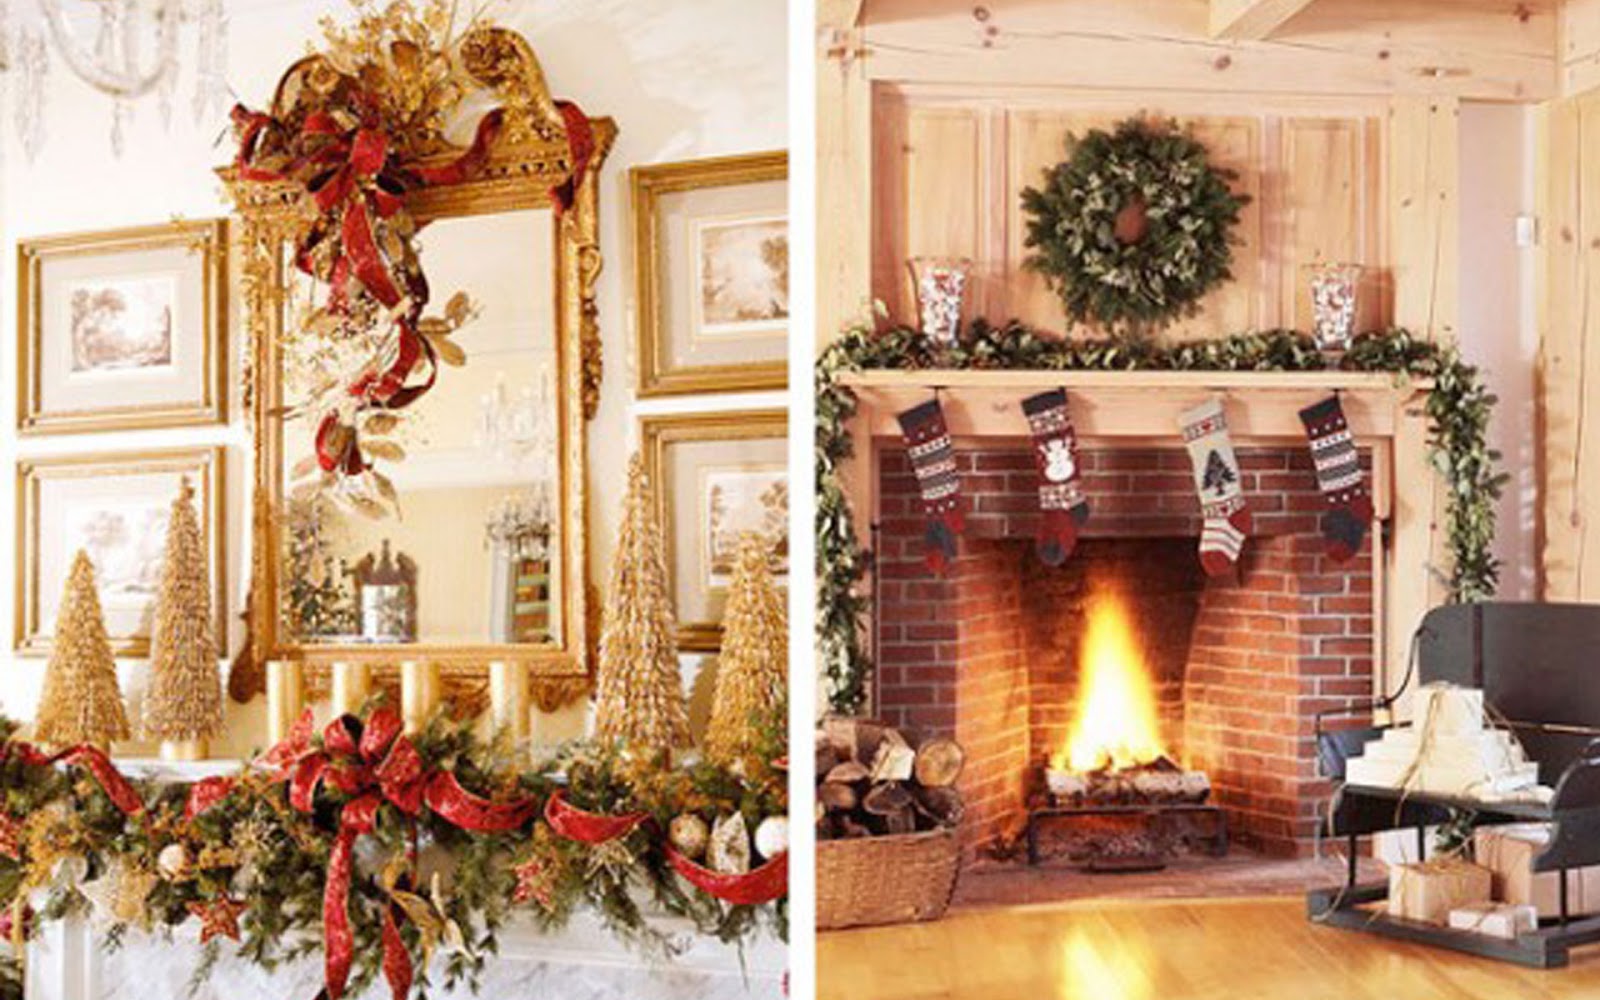 Decorate your Mantel or Chimney for Christmas  Let s 